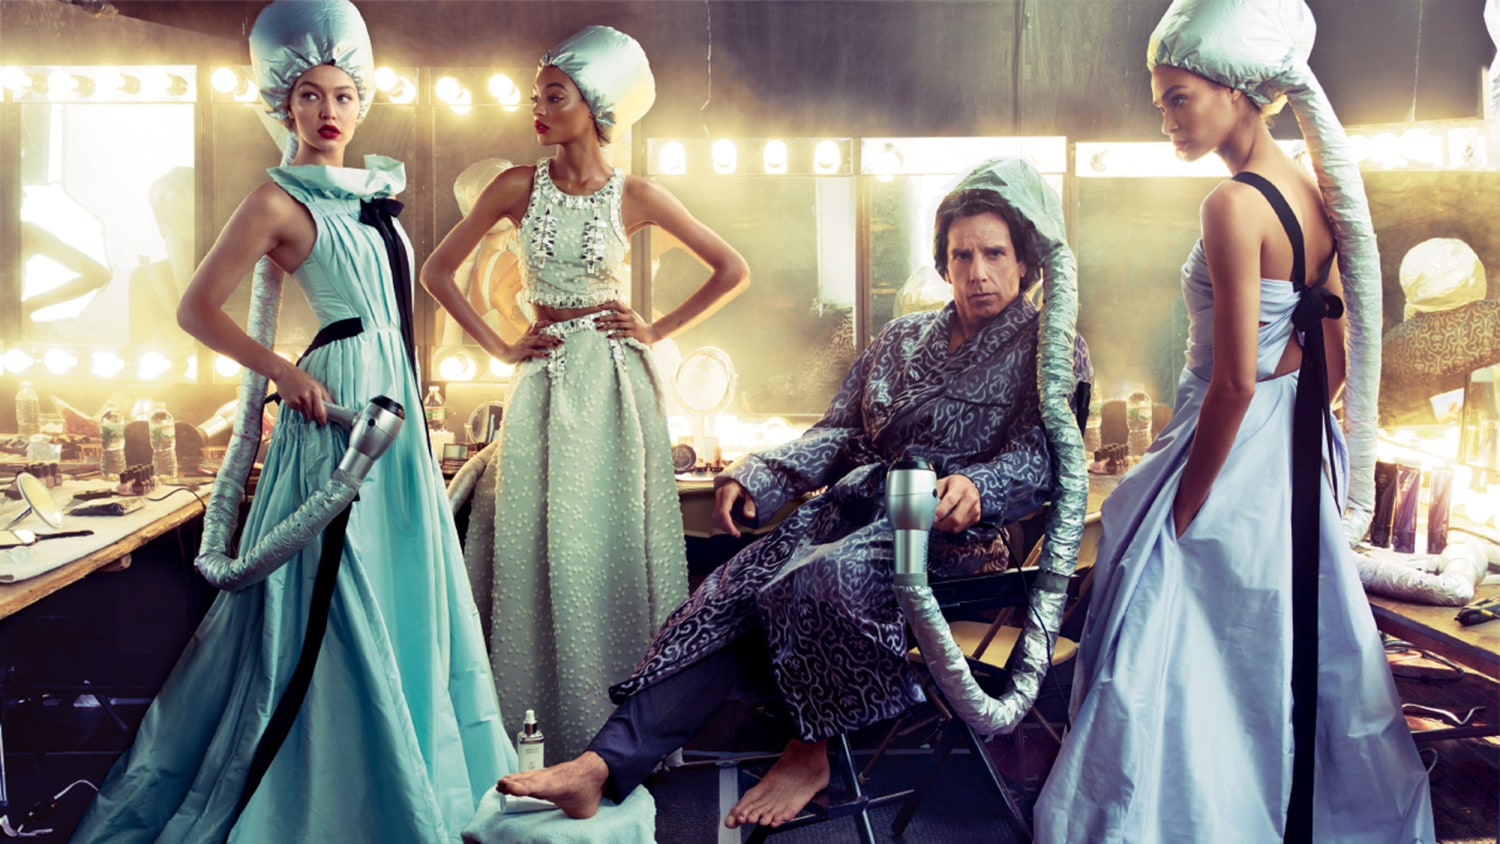 See Derek Zoolander's 'ridiculously good-looking' first Vogue cover